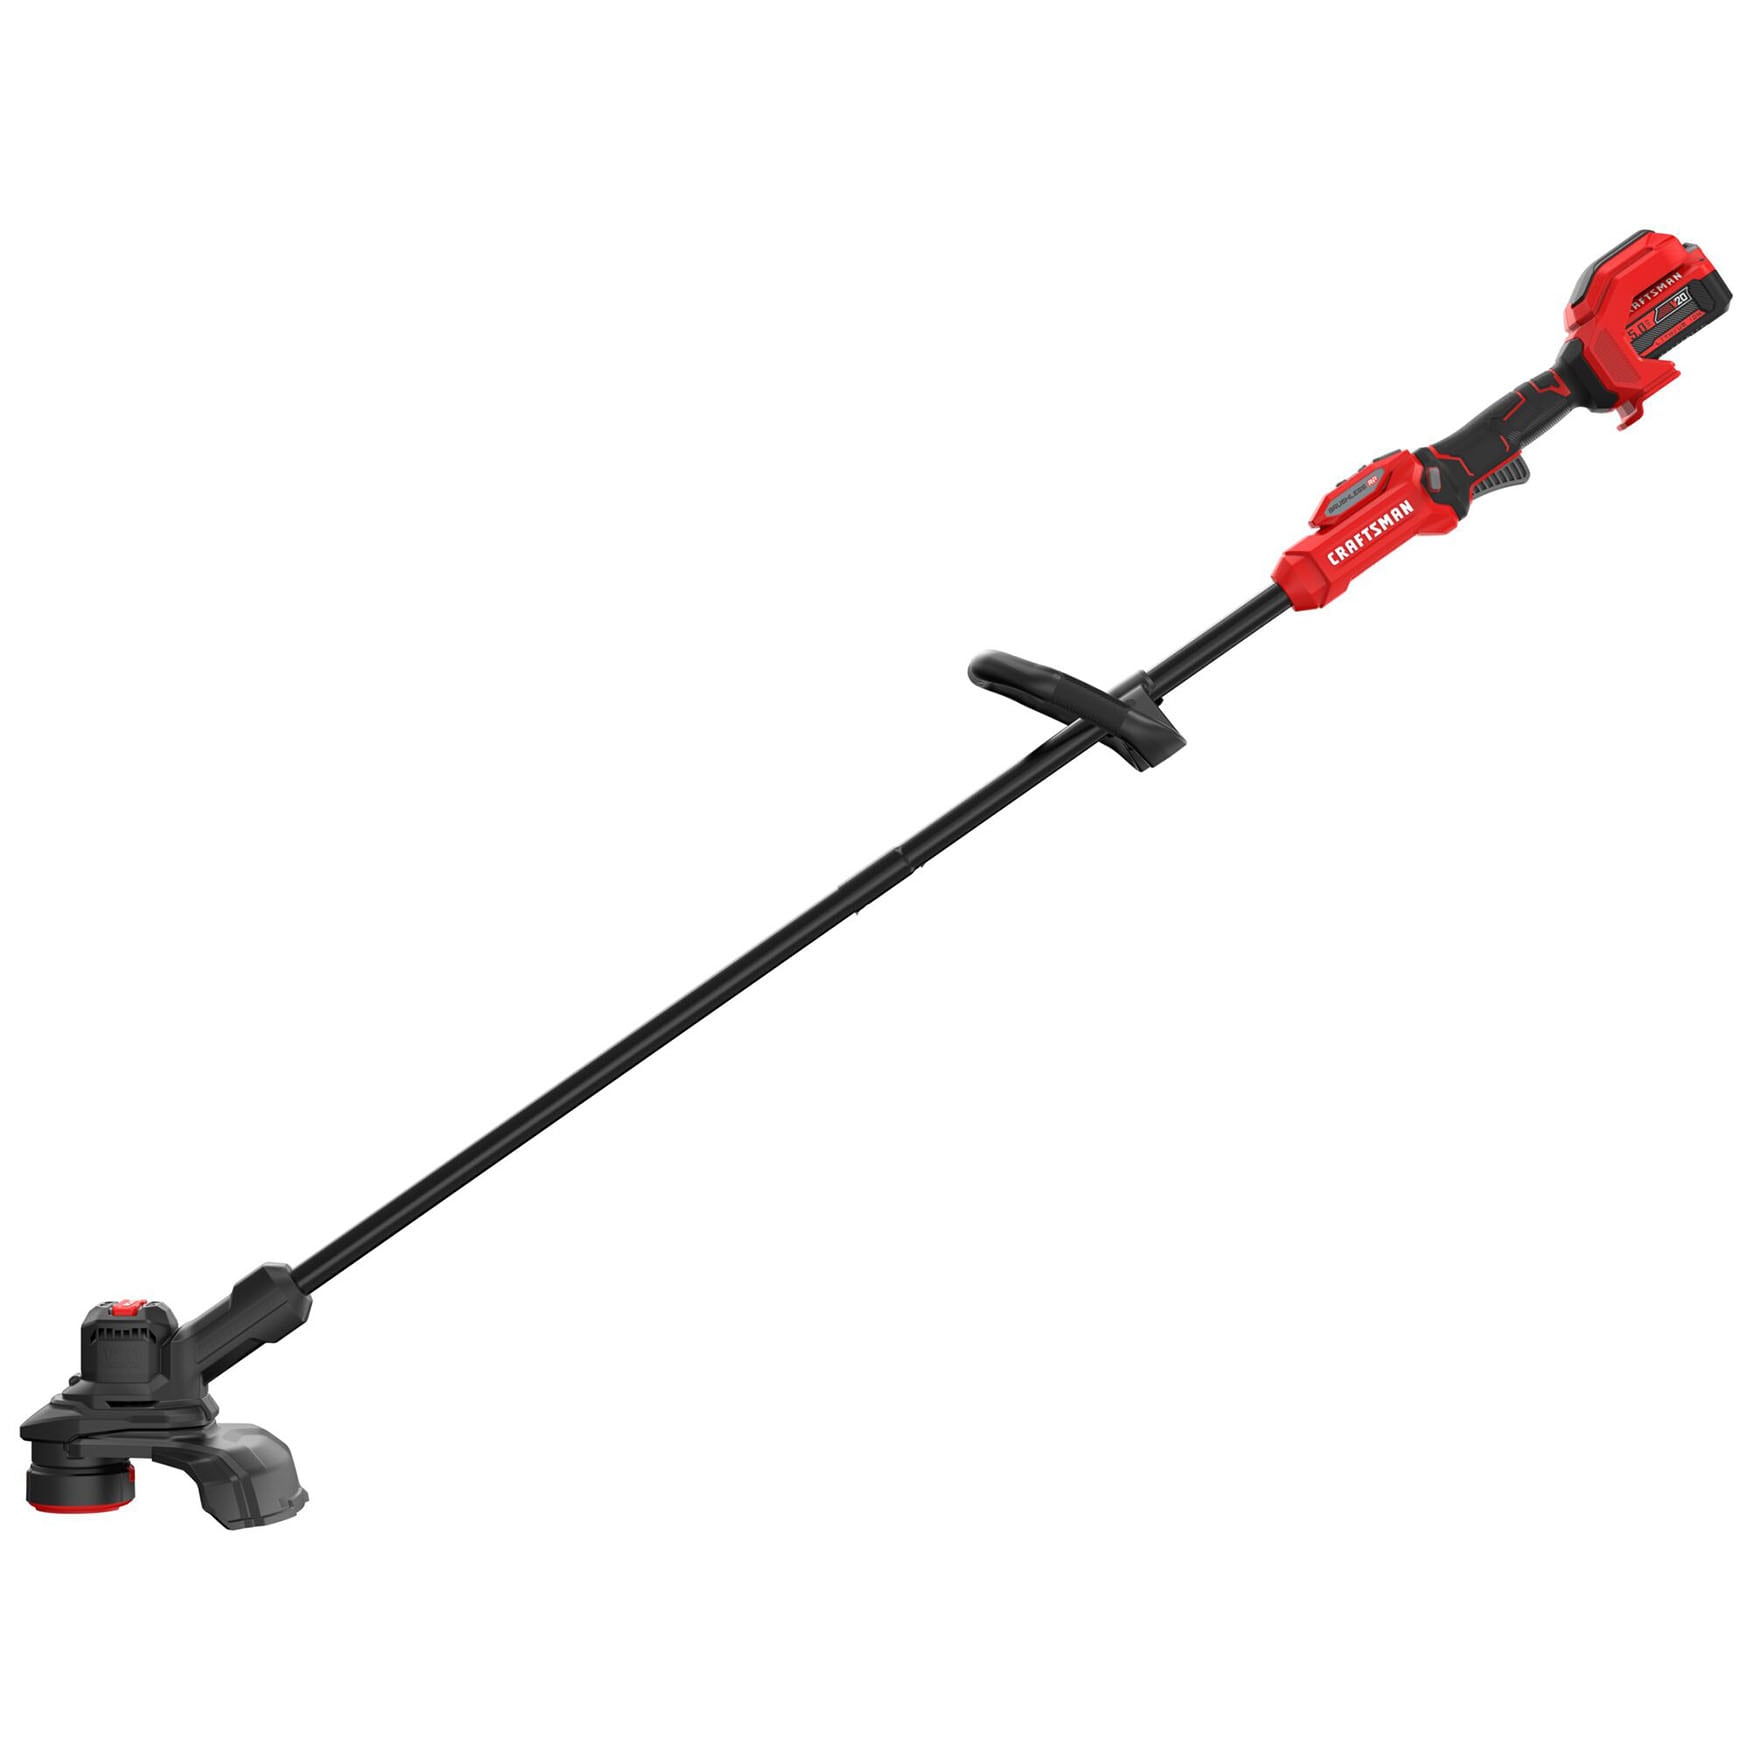 Weed-Wacker-By-Craftsman-Leaf-Blower-And-Edger-trencher-By-Black